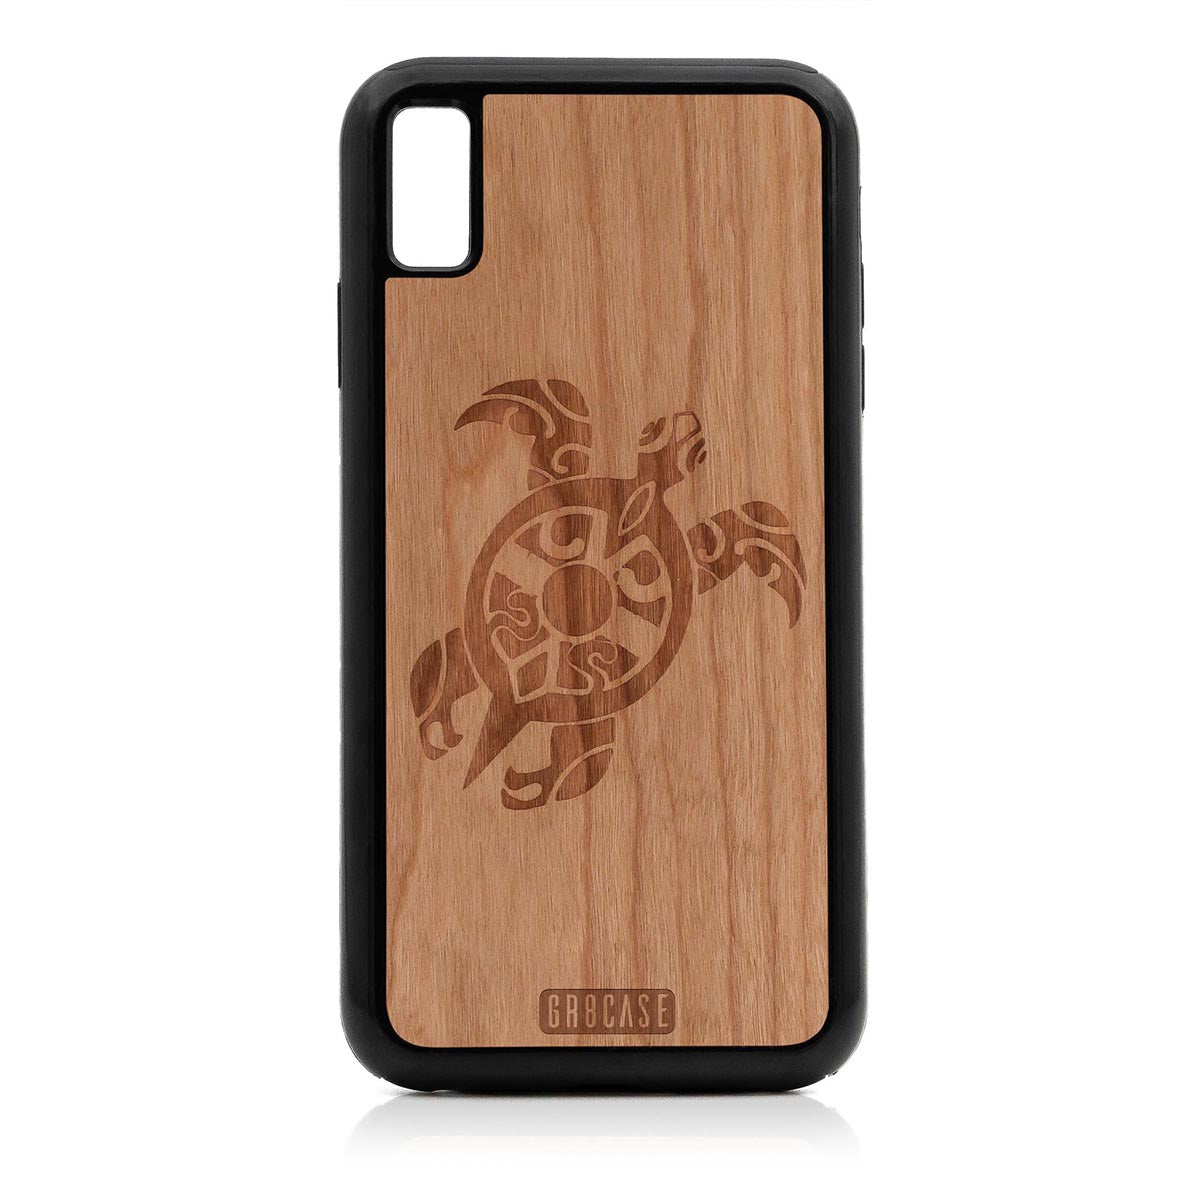 Turtle Design Wood Case For iPhone XS Max